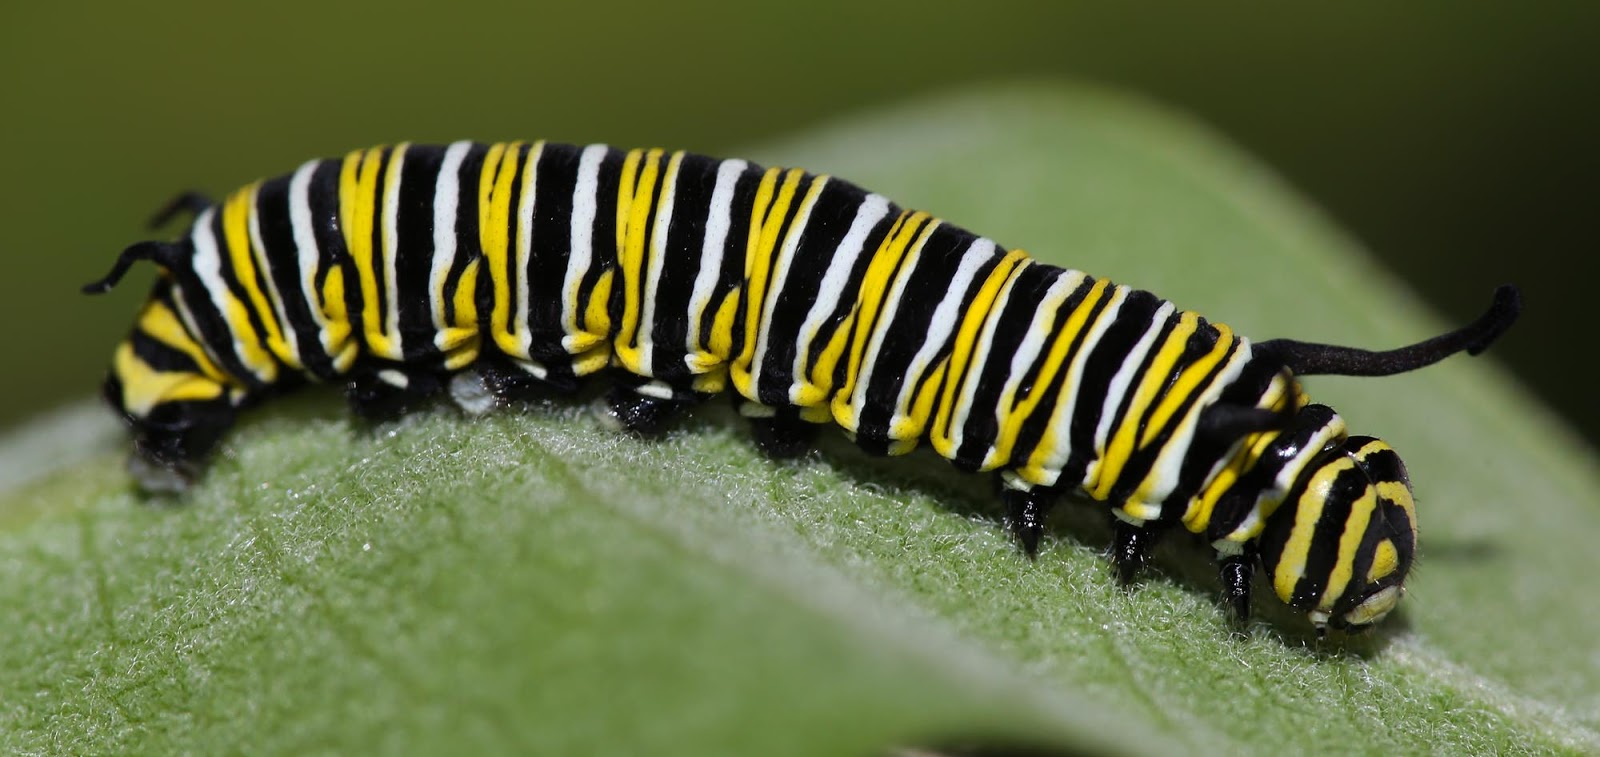 All of Nature: Monarch Caterpillar Growth